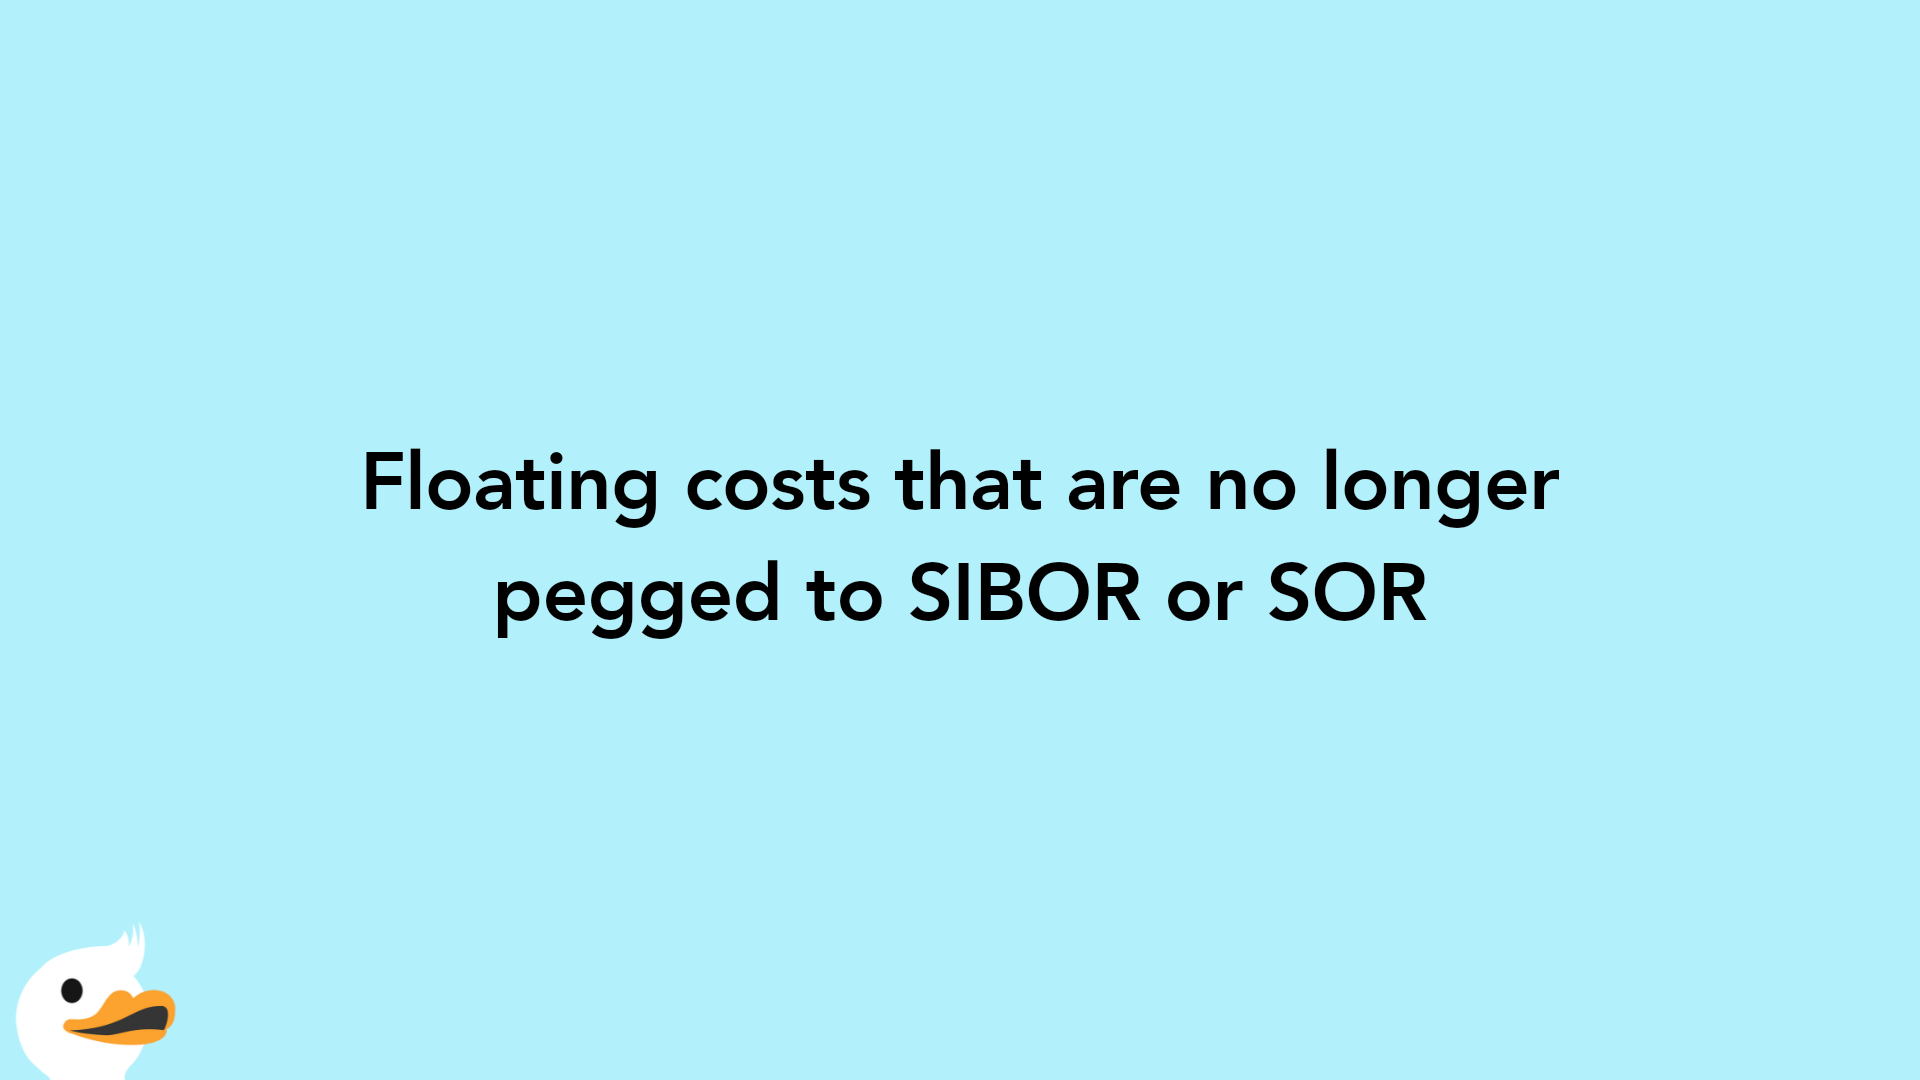 Floating costs that are no longer pegged to SIBOR or SOR